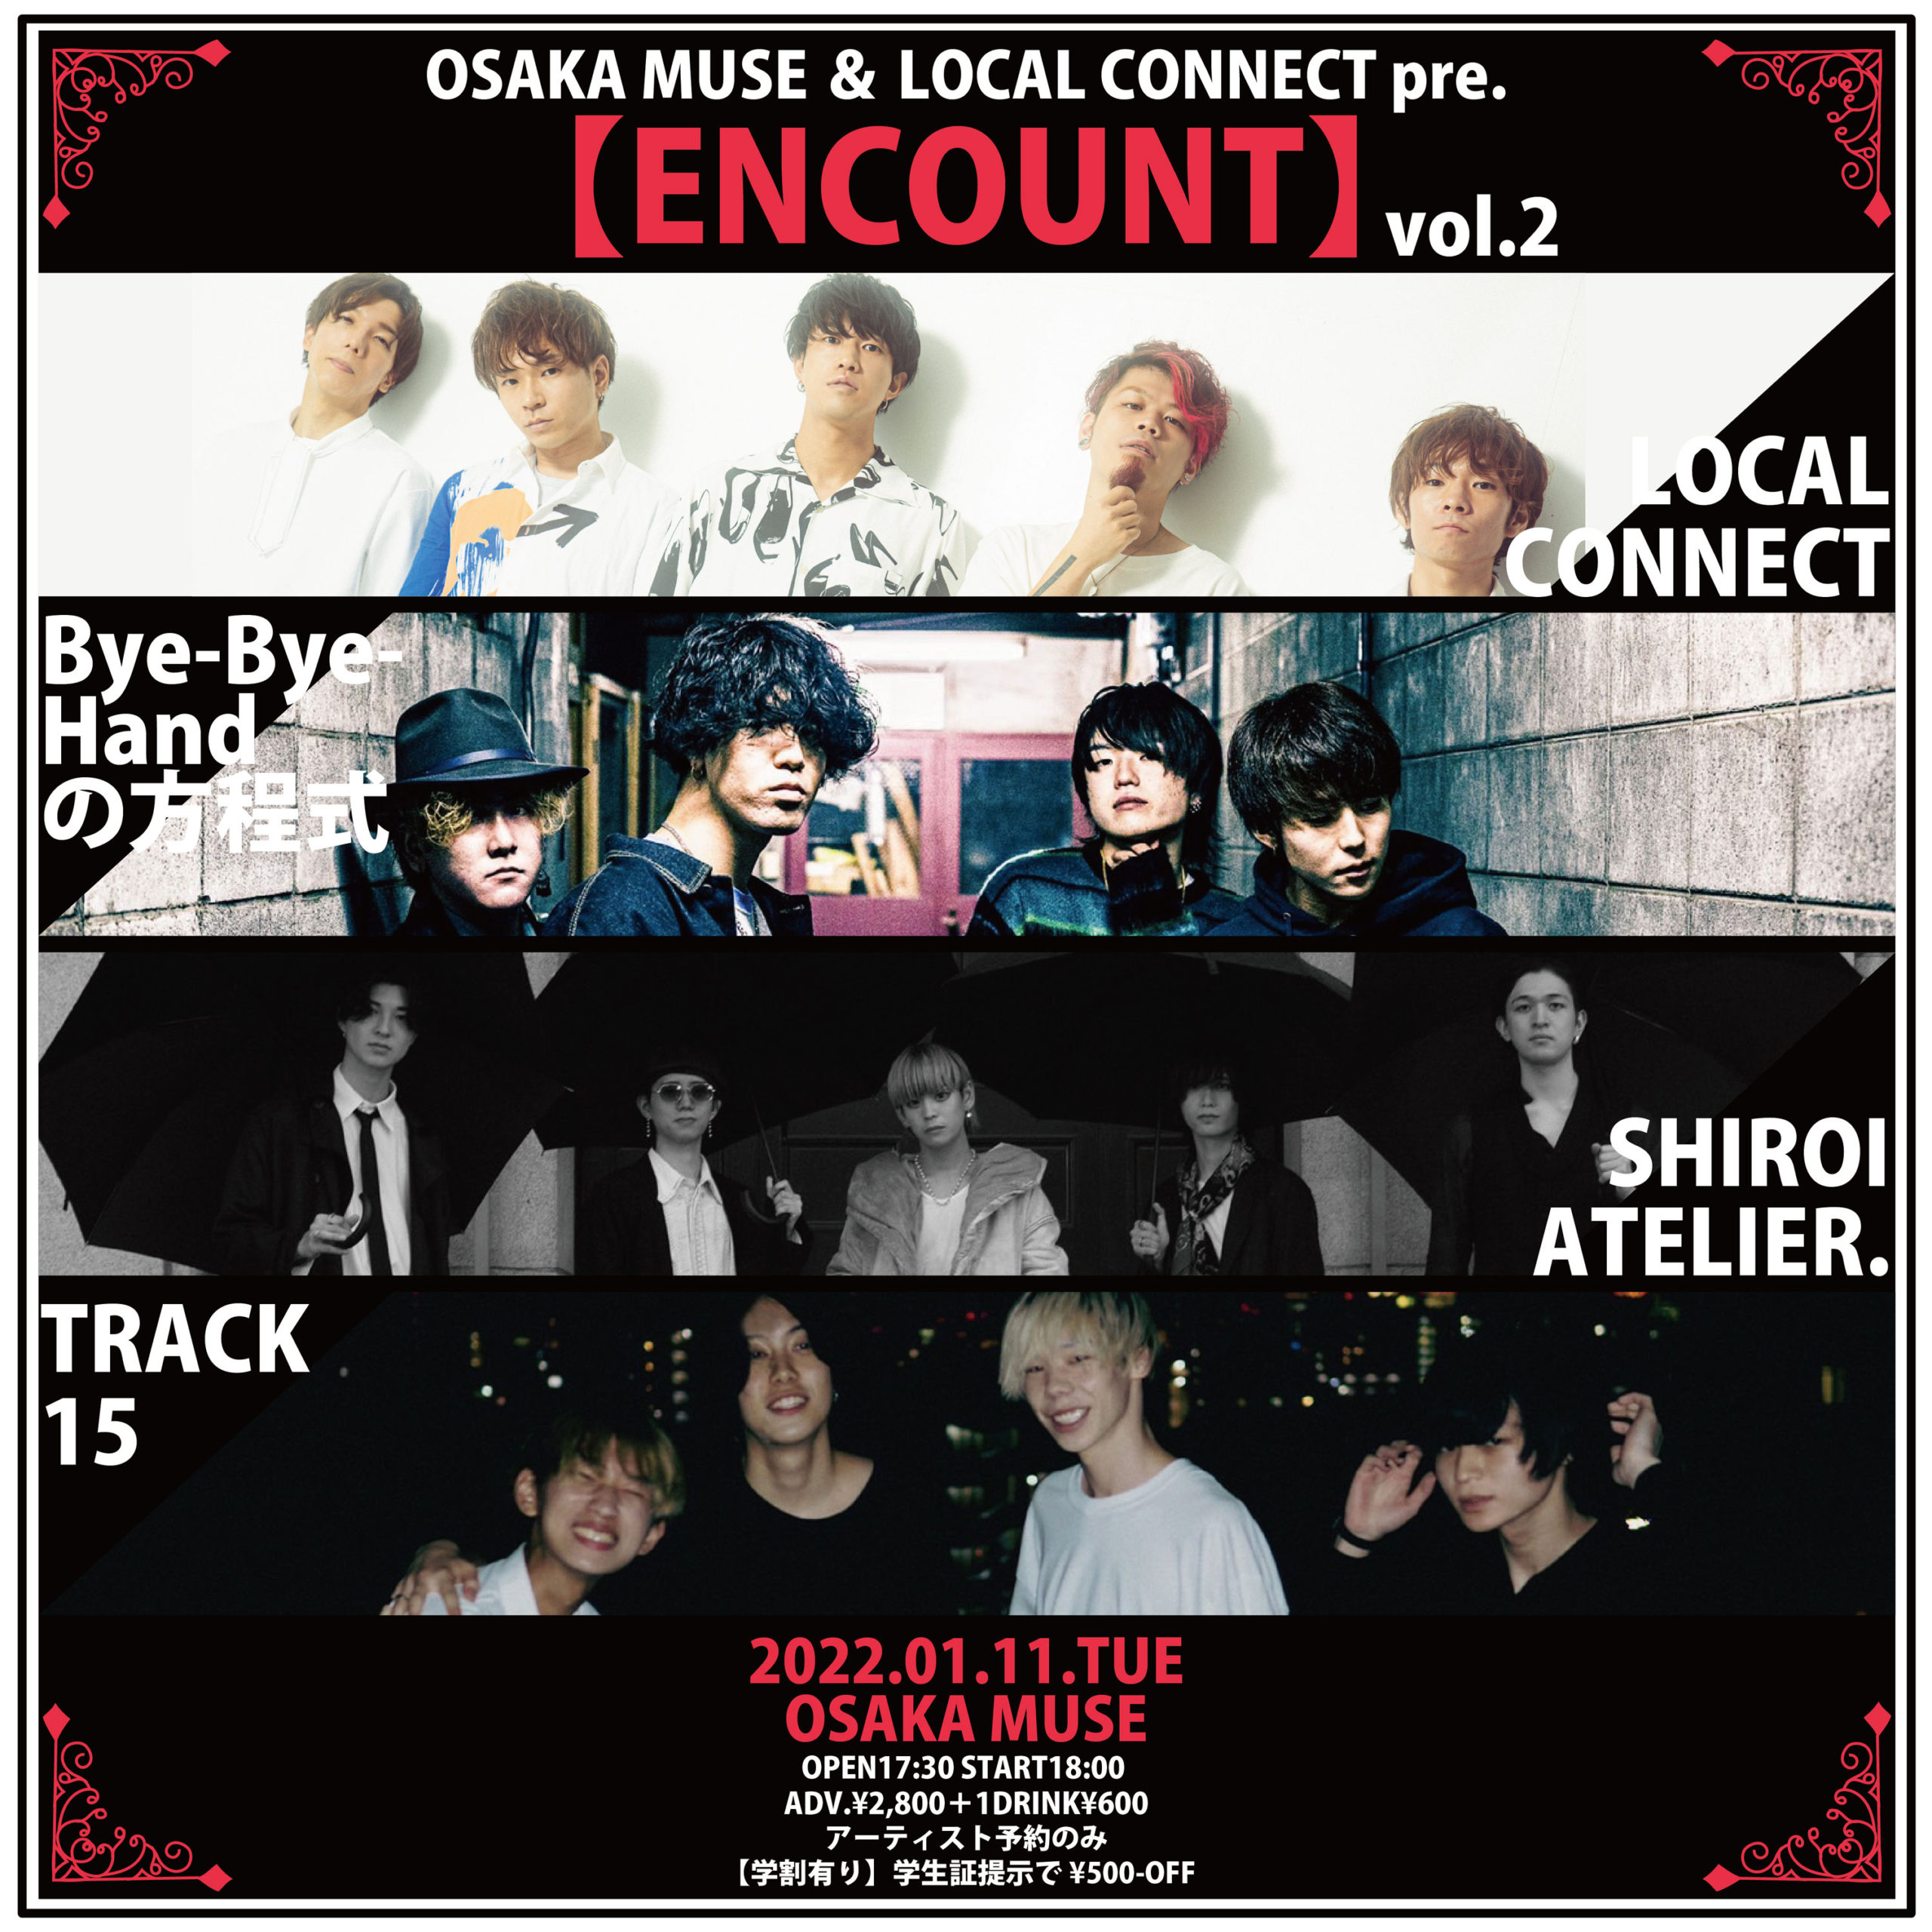 OSAKA MUSE ＆ LOCAL CONNECT pre. 【ENCOUNT】vol.2